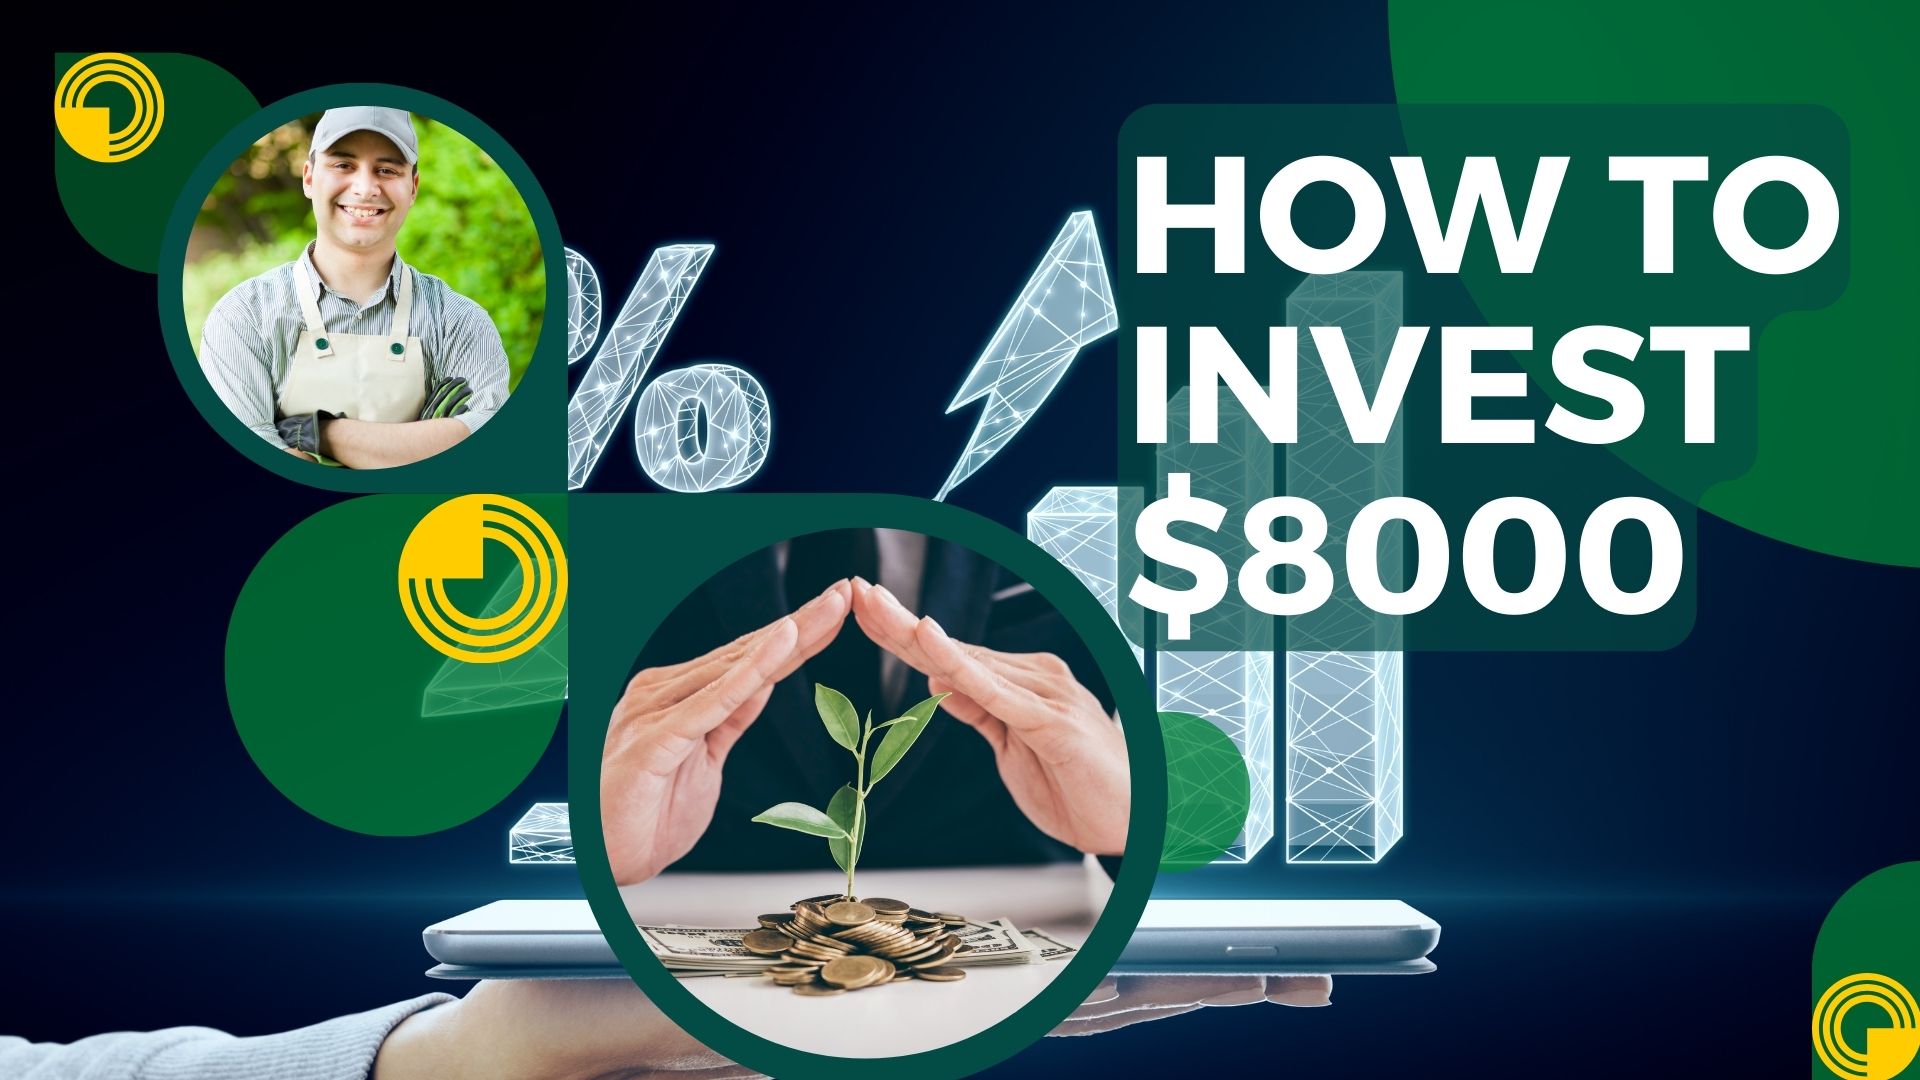 How to Invest $8000